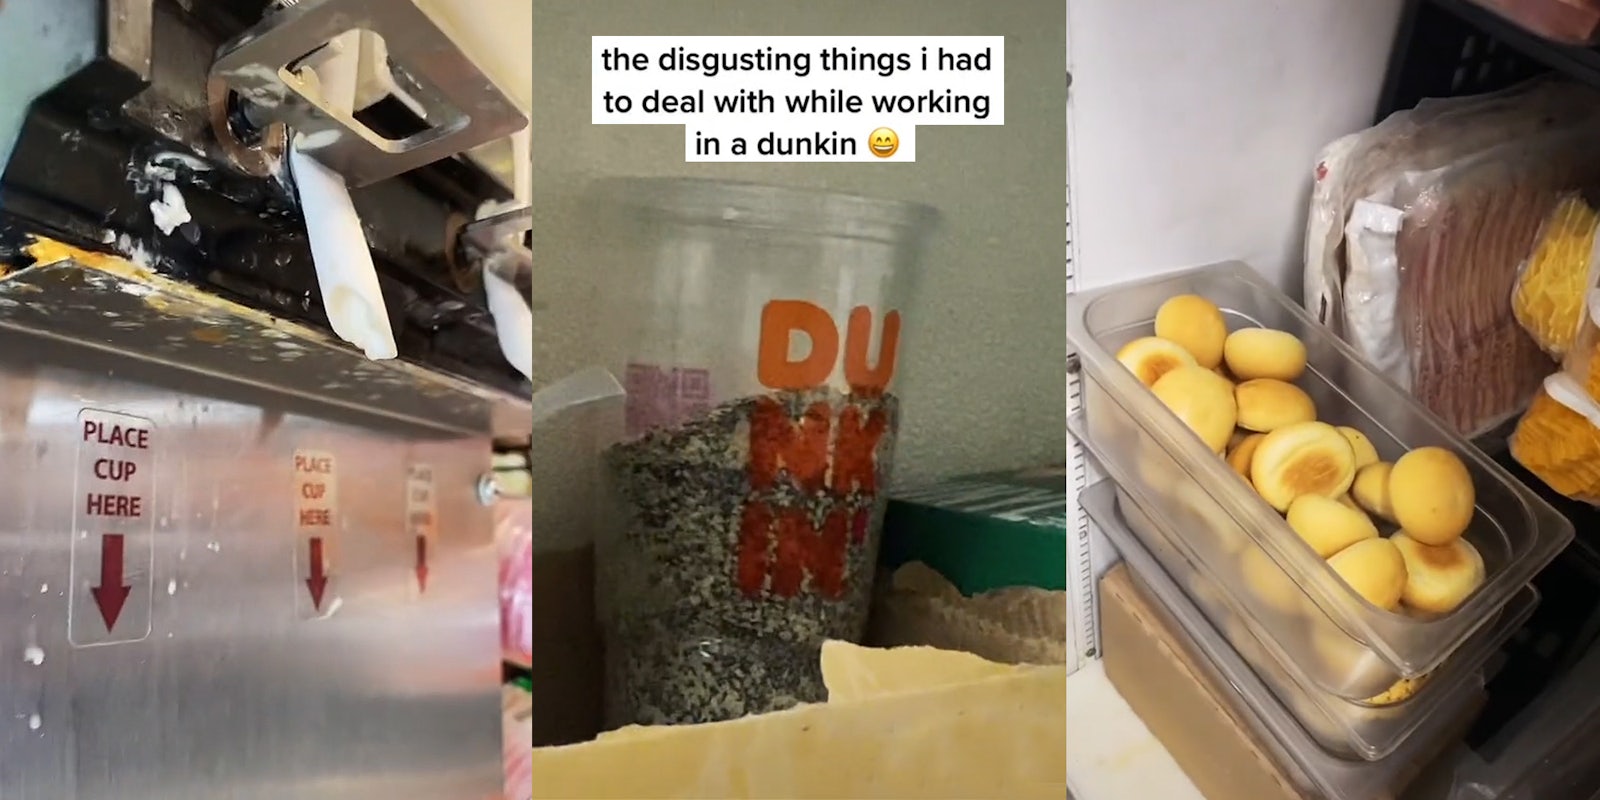 dirty dairy machine with old dairy product (l) everything bagel seasoning in Dunkin cup on cardboard box caption 'the disgusting things i had to deal with while working in a dunkin' (c) food sitting out unrefrigerated in clear containers (r)